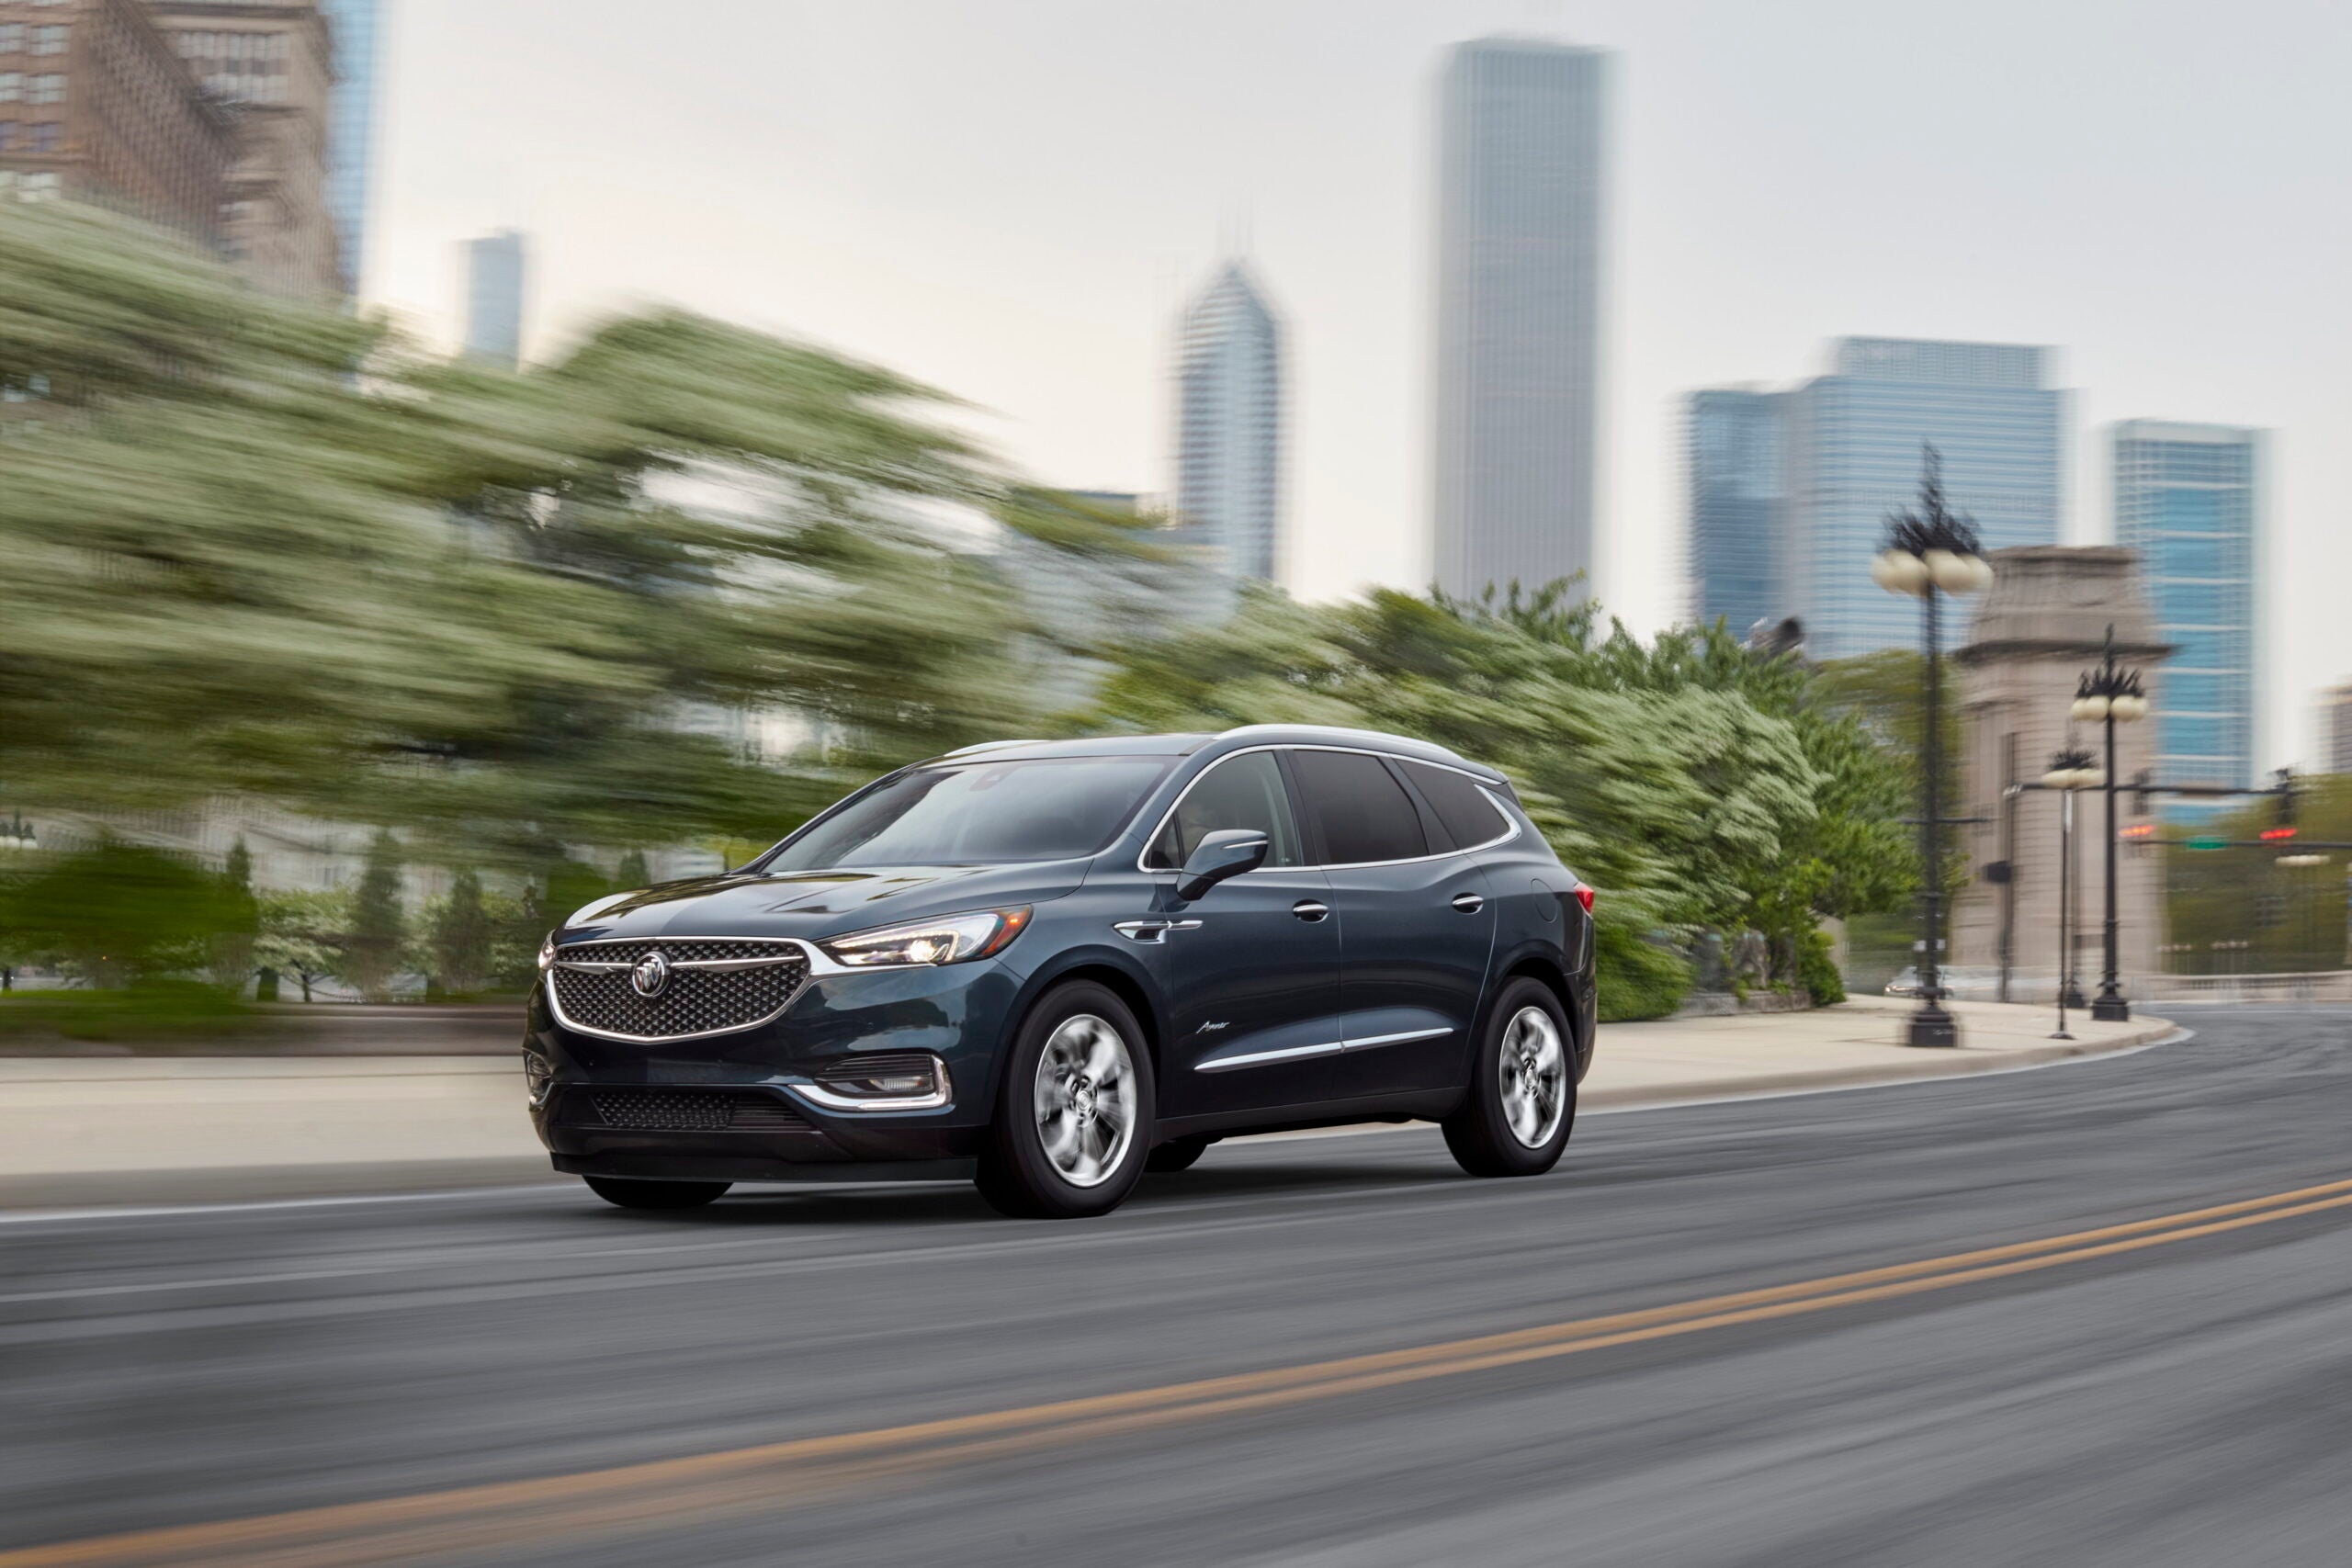 What the experts say about the 2018 Buick Enclave